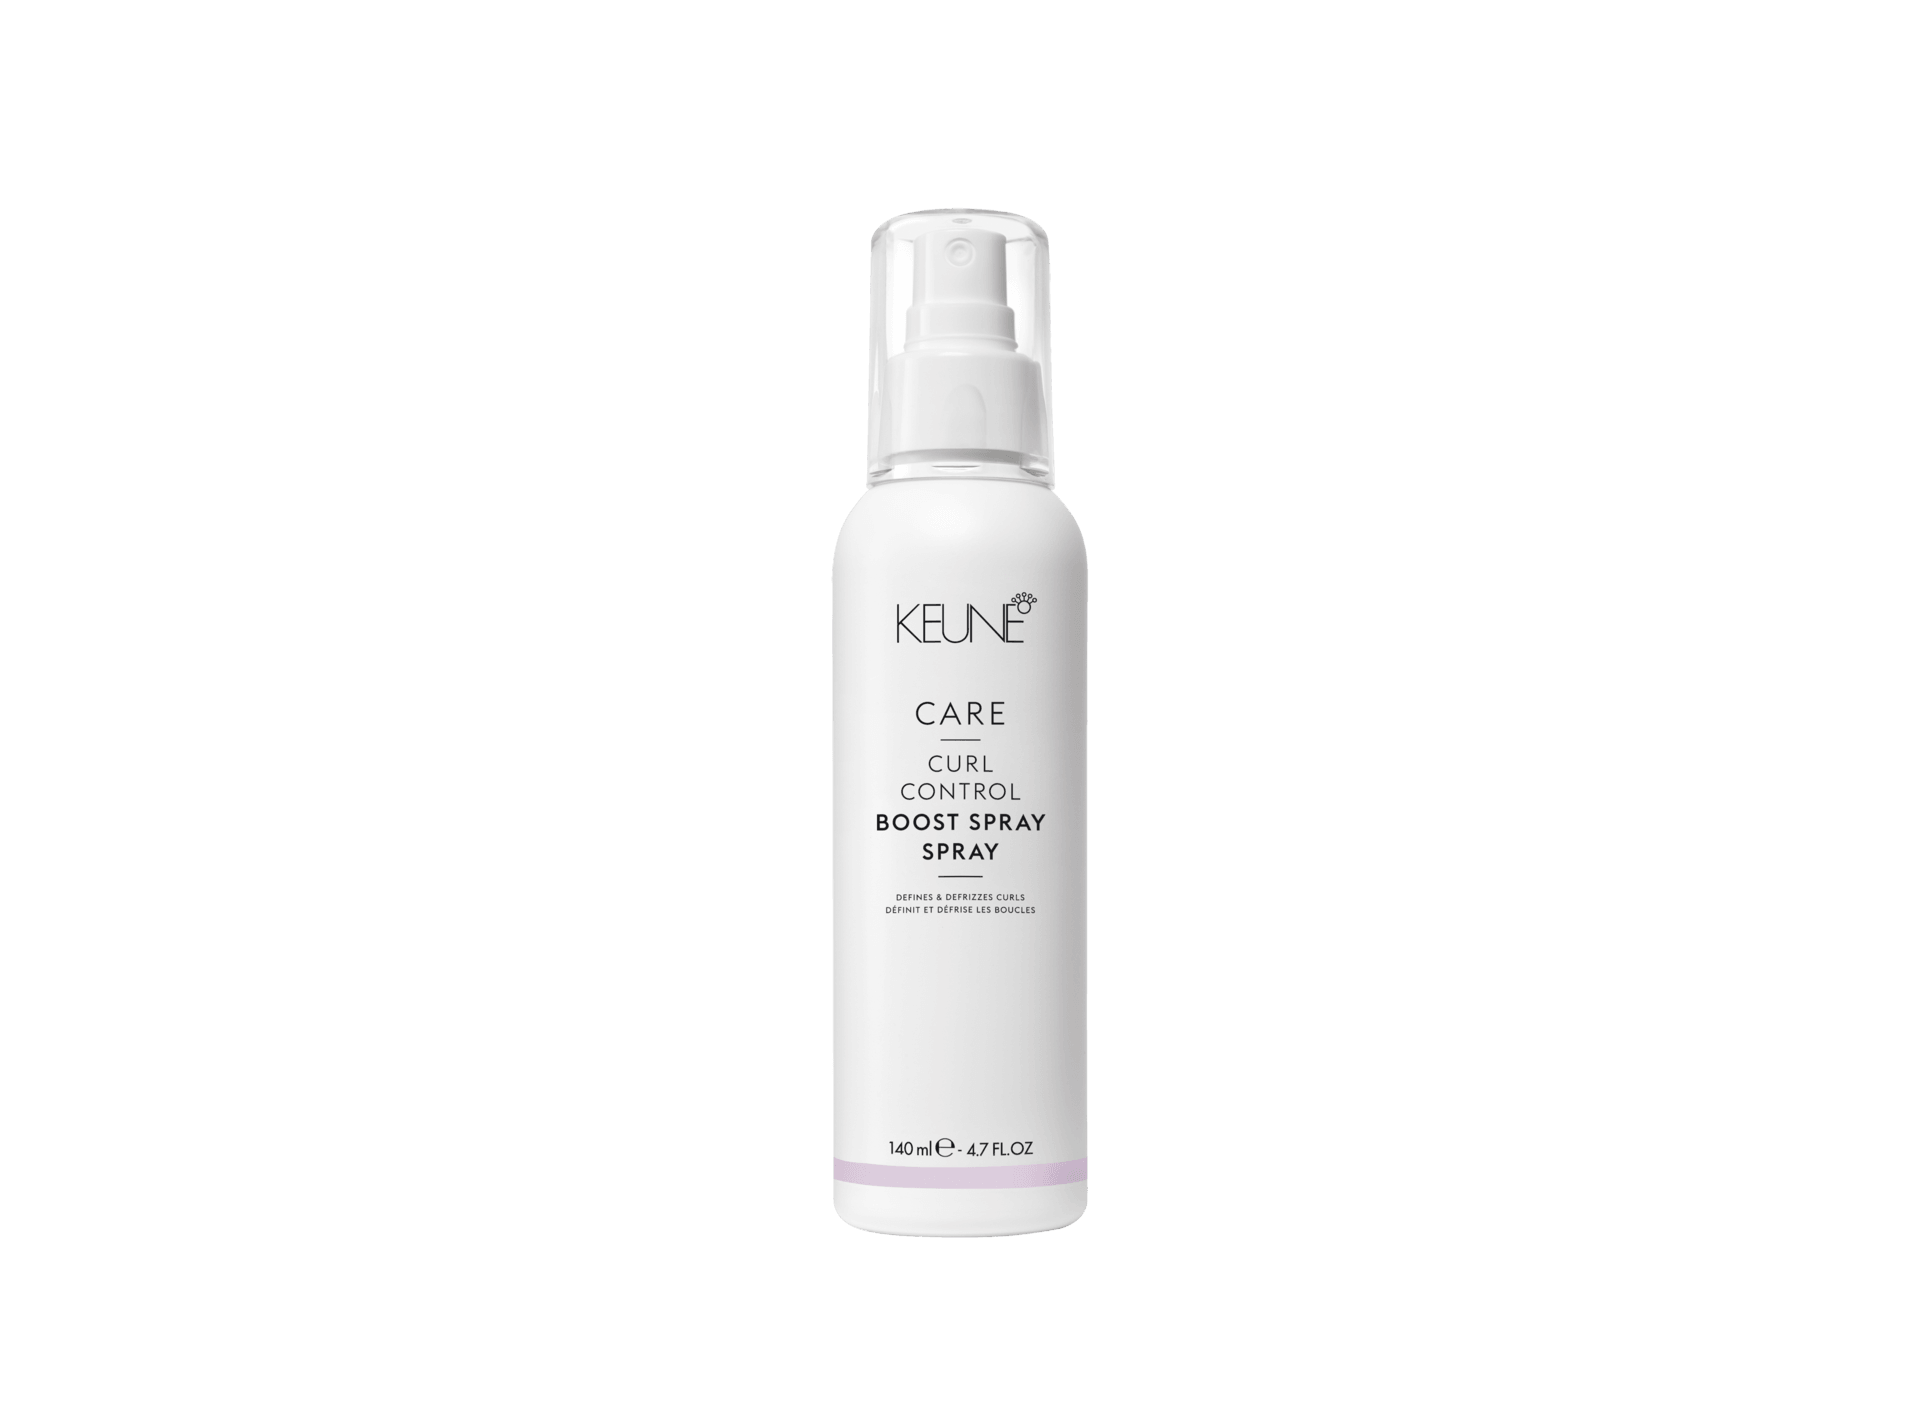 Keune Care Curl Control Boost Spray 140ml *available To Qld Customers Only